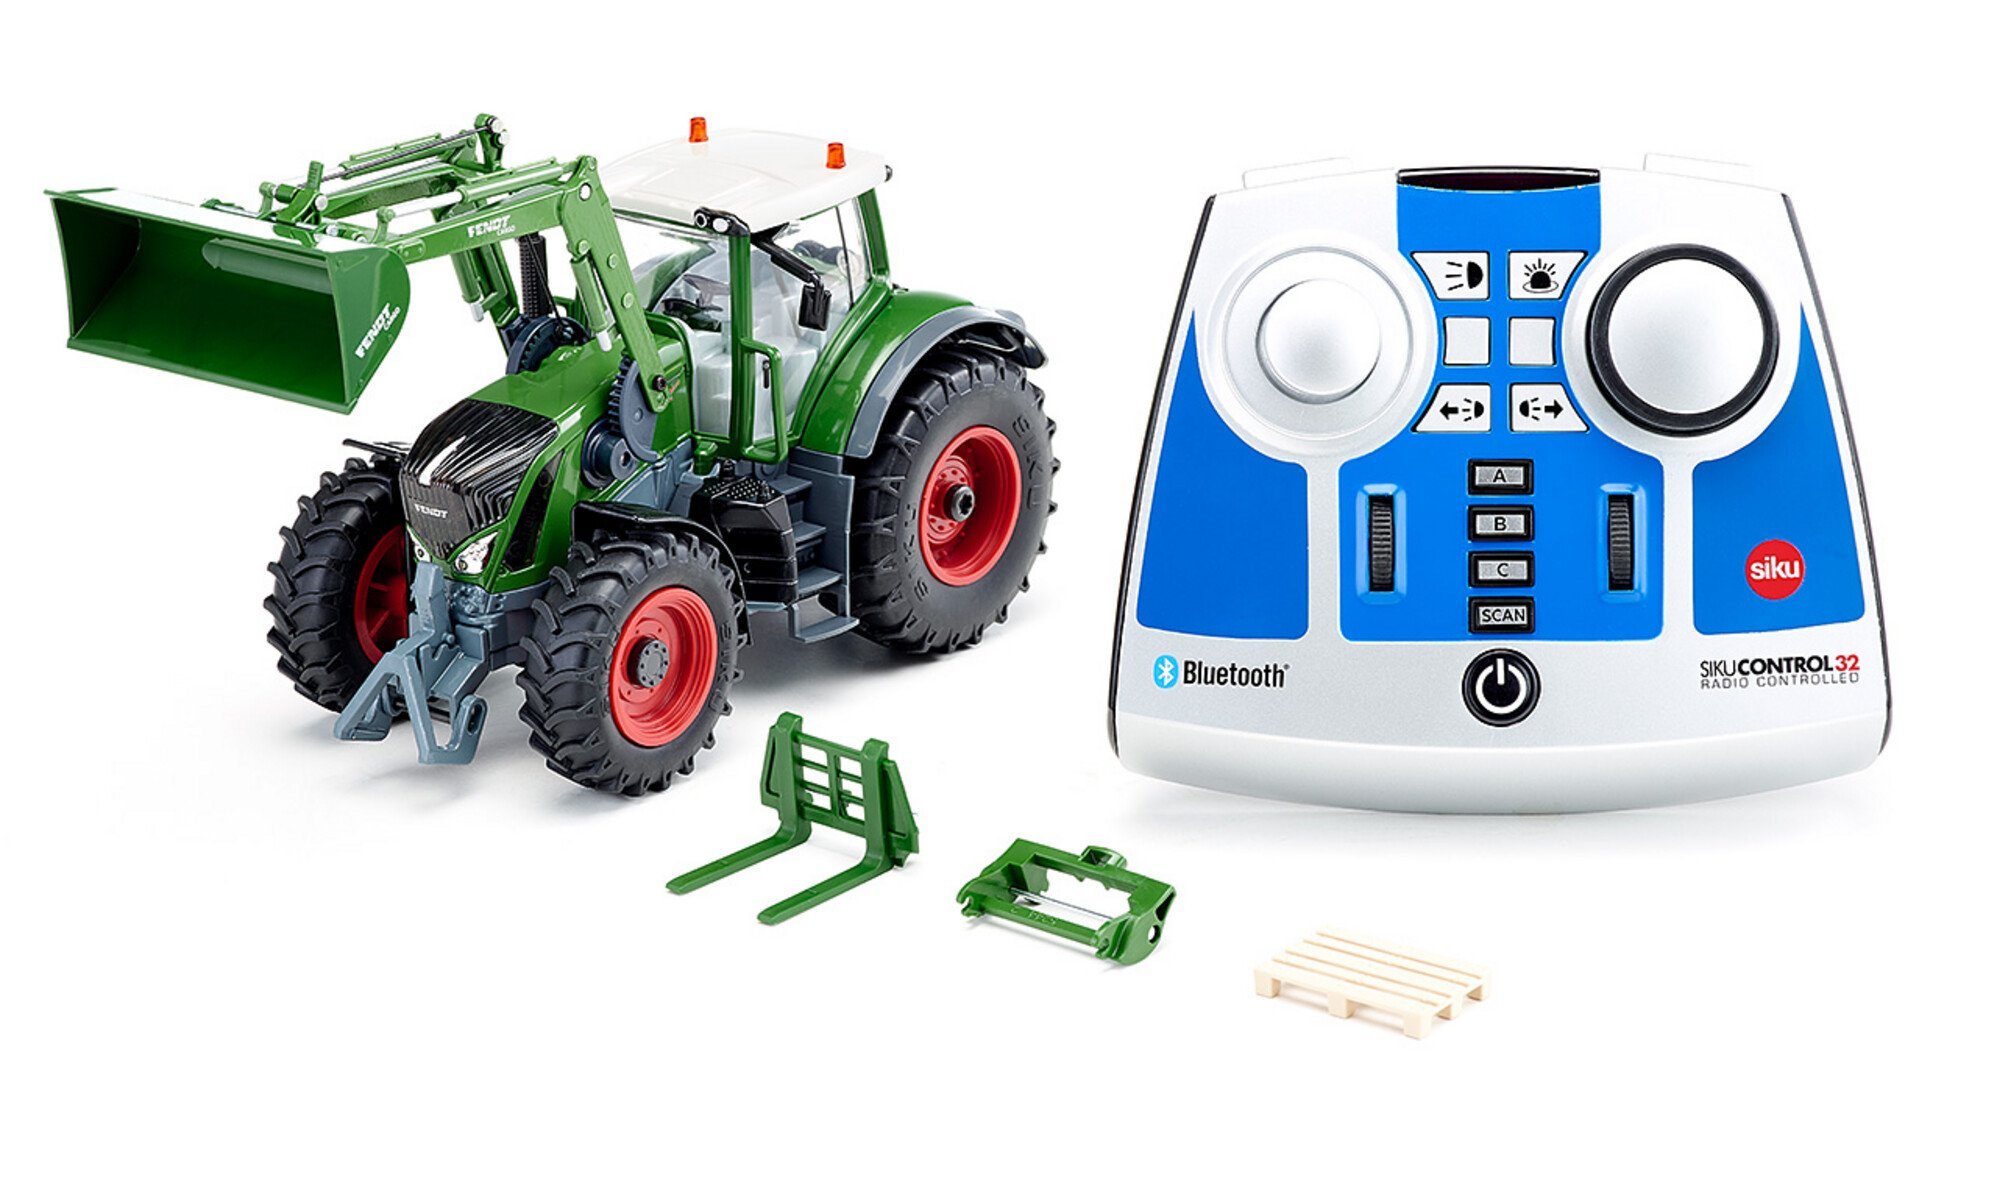 Fendt 933 Vario with front loader and remote control Bluetooth and app control